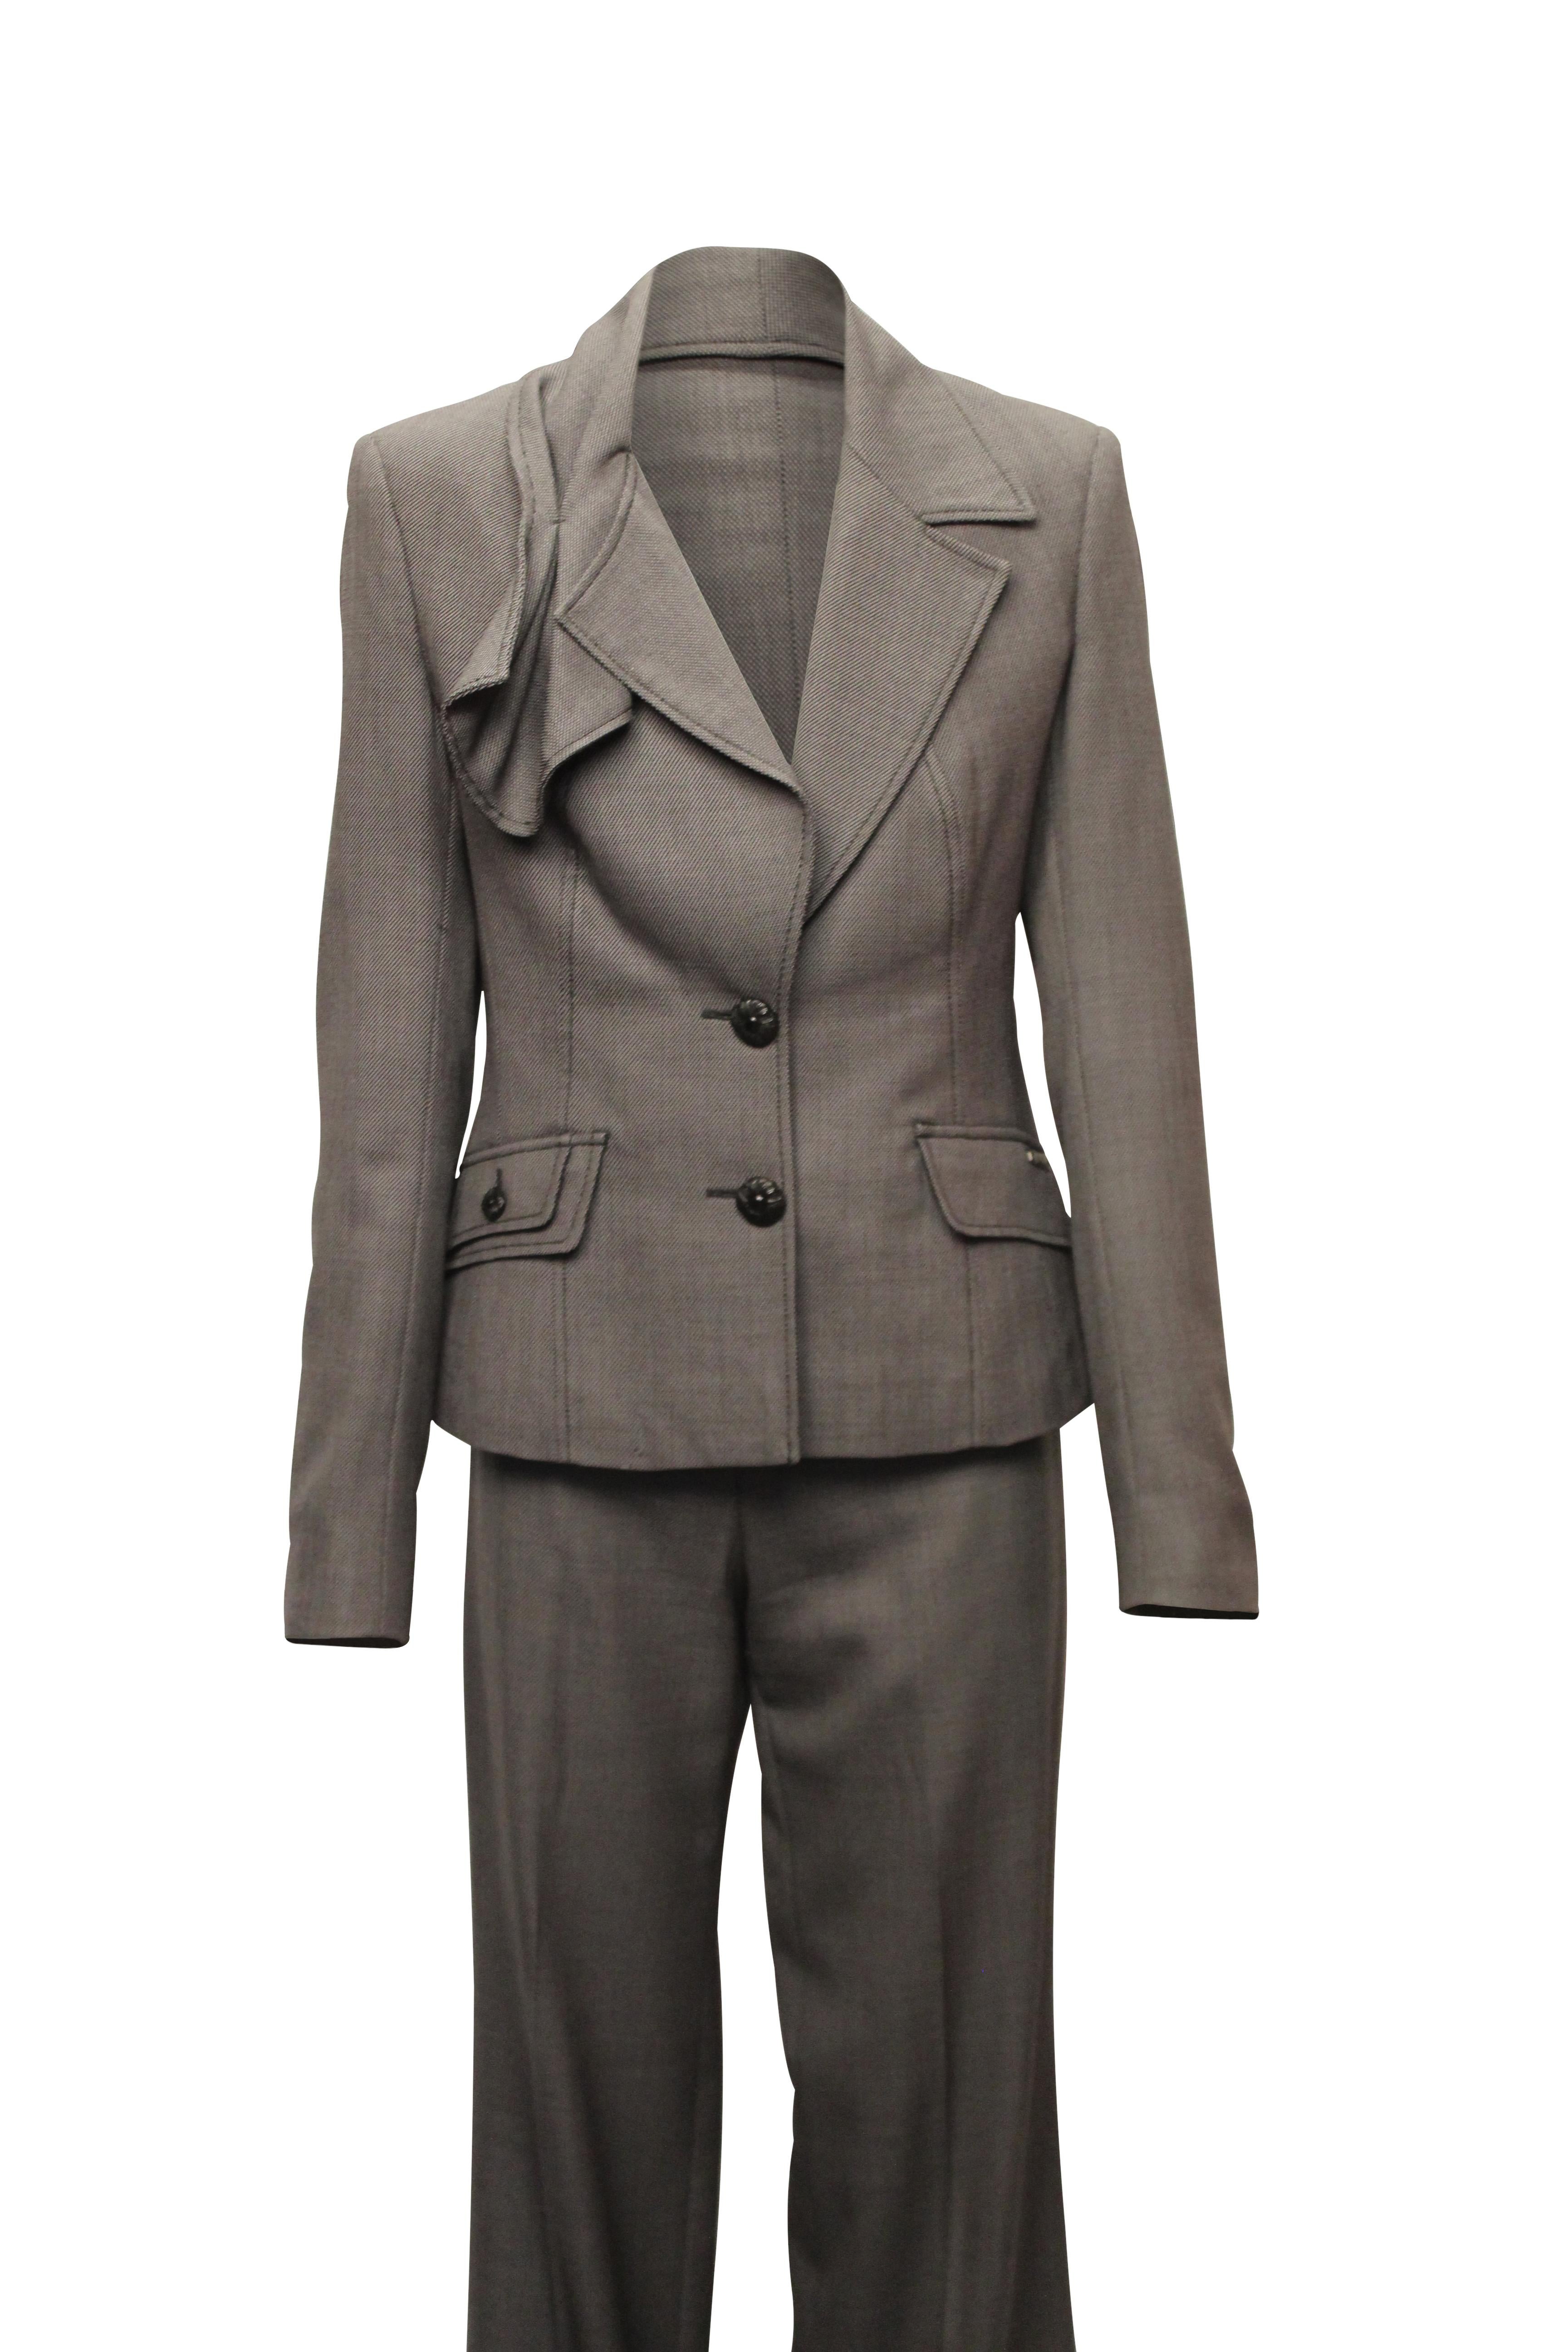 Incredible John Galliano womens pant suit. This powerful two piece in lightweight yet durable wool blend with polyester lining. 
Size 28/42